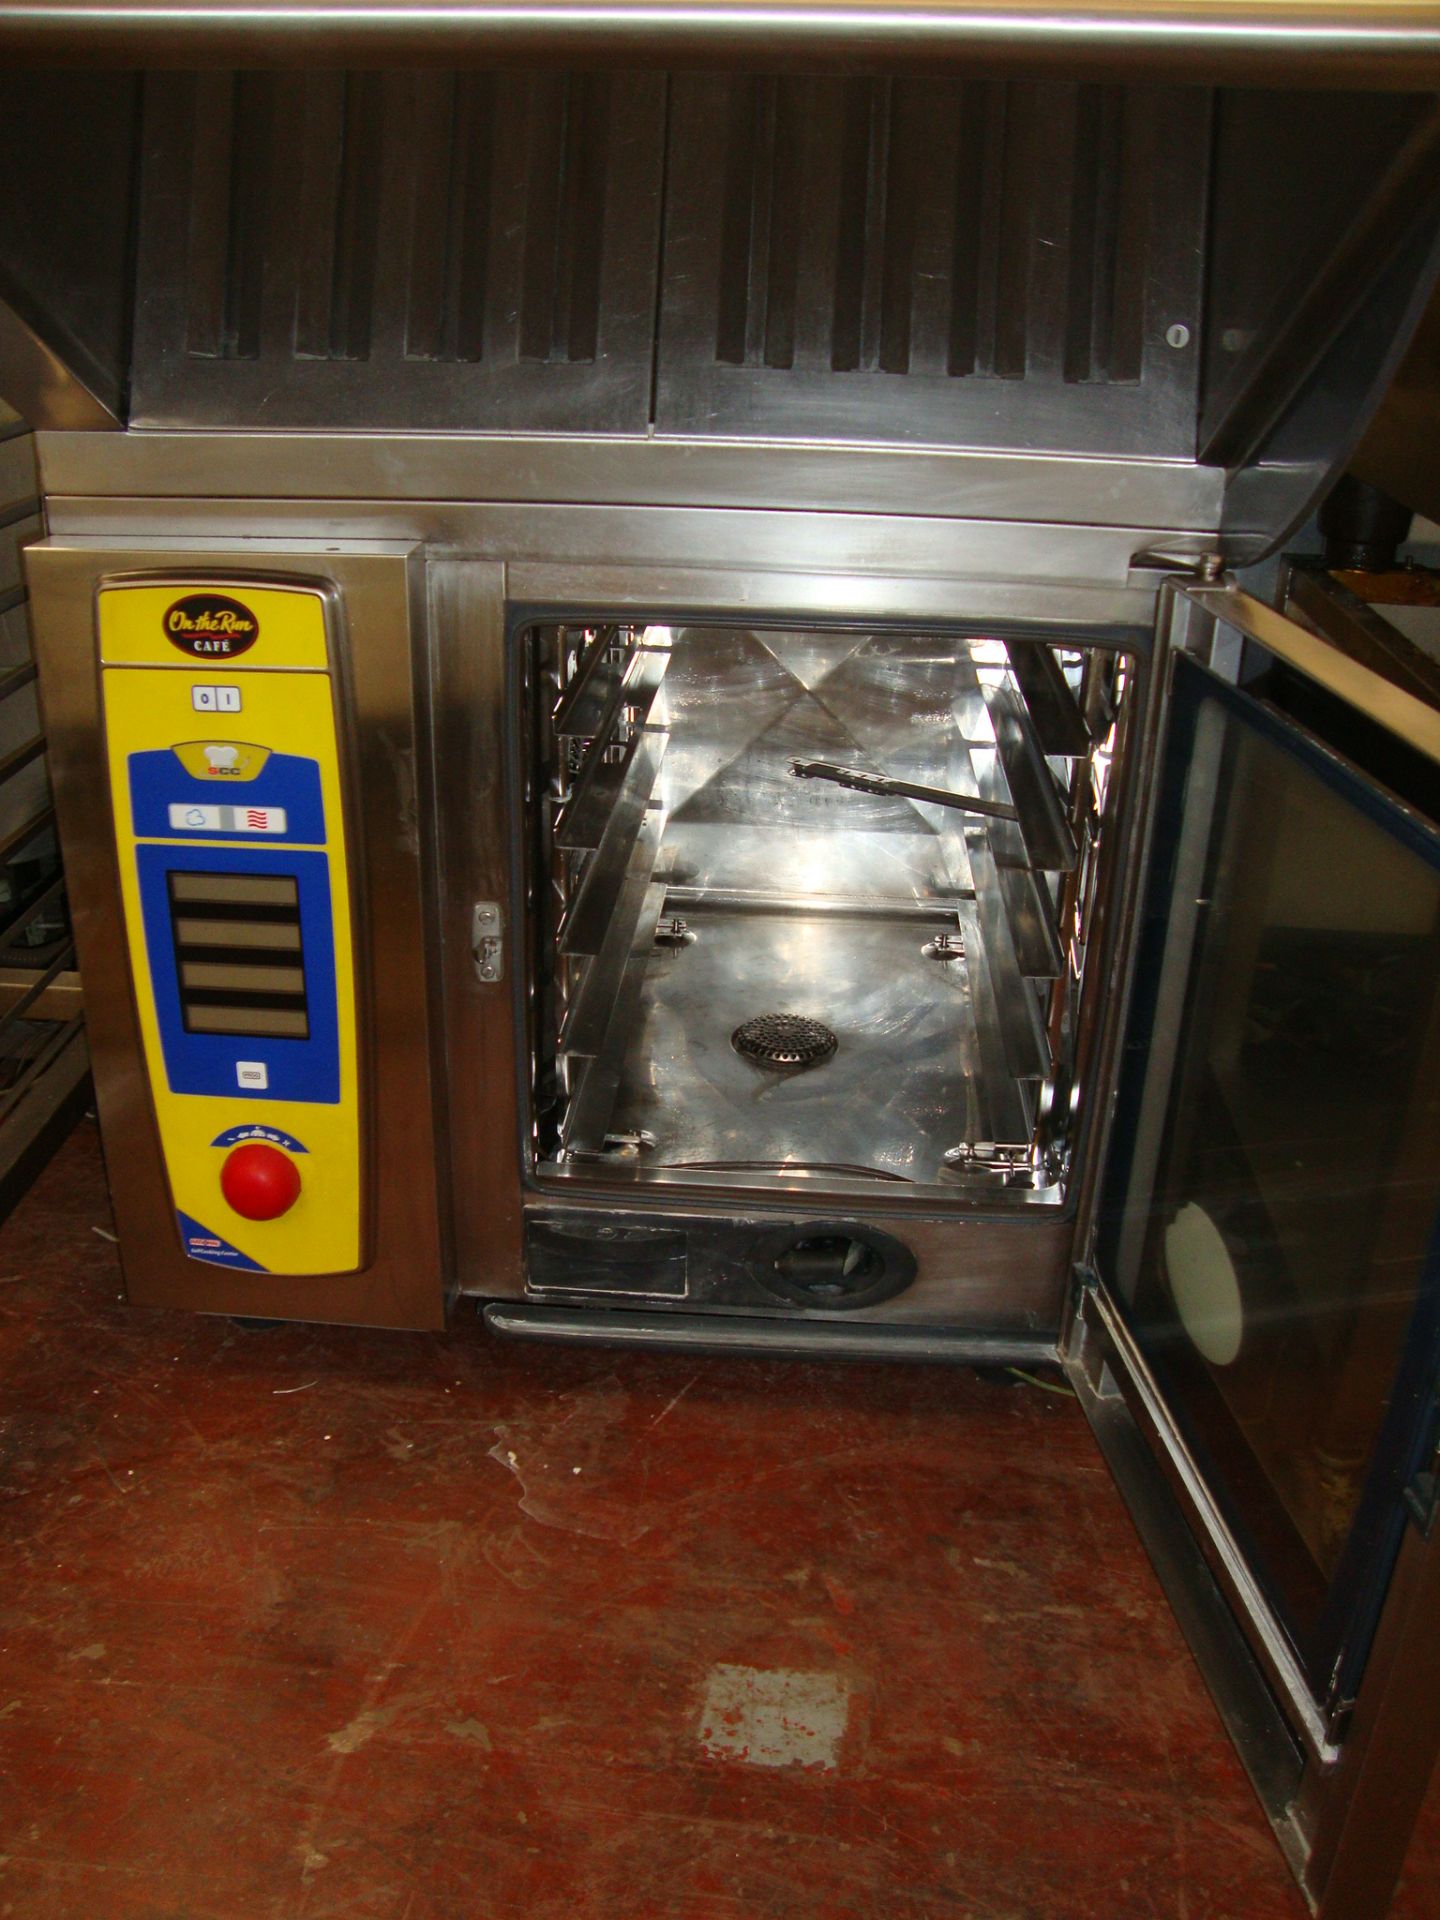 Rational model SCC61 stainless steel multifunction oven, plus stainless steel extractor hood model - Image 8 of 12